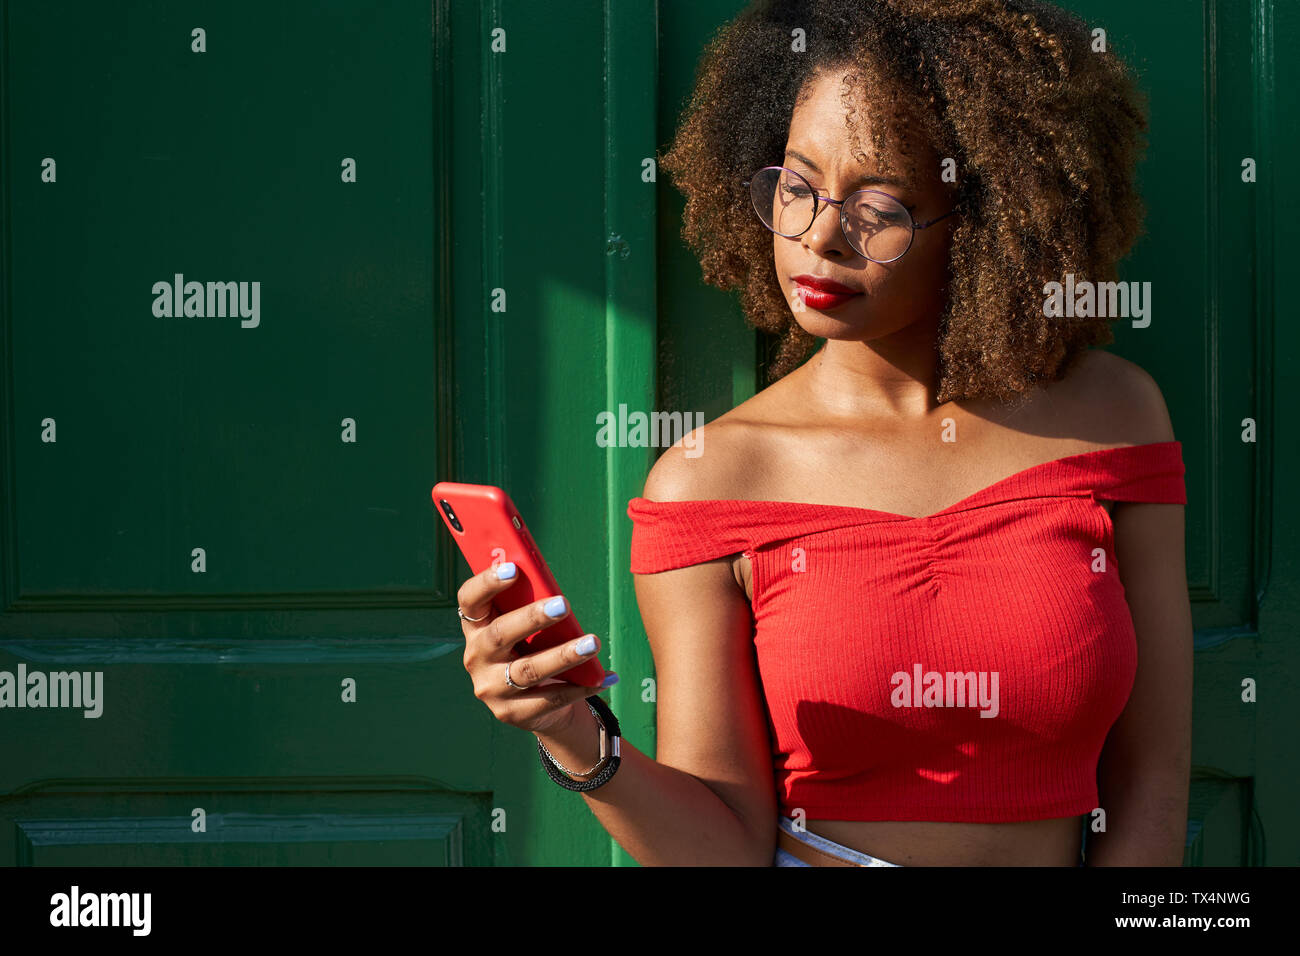 Woman in red checking her phone Stock Photo